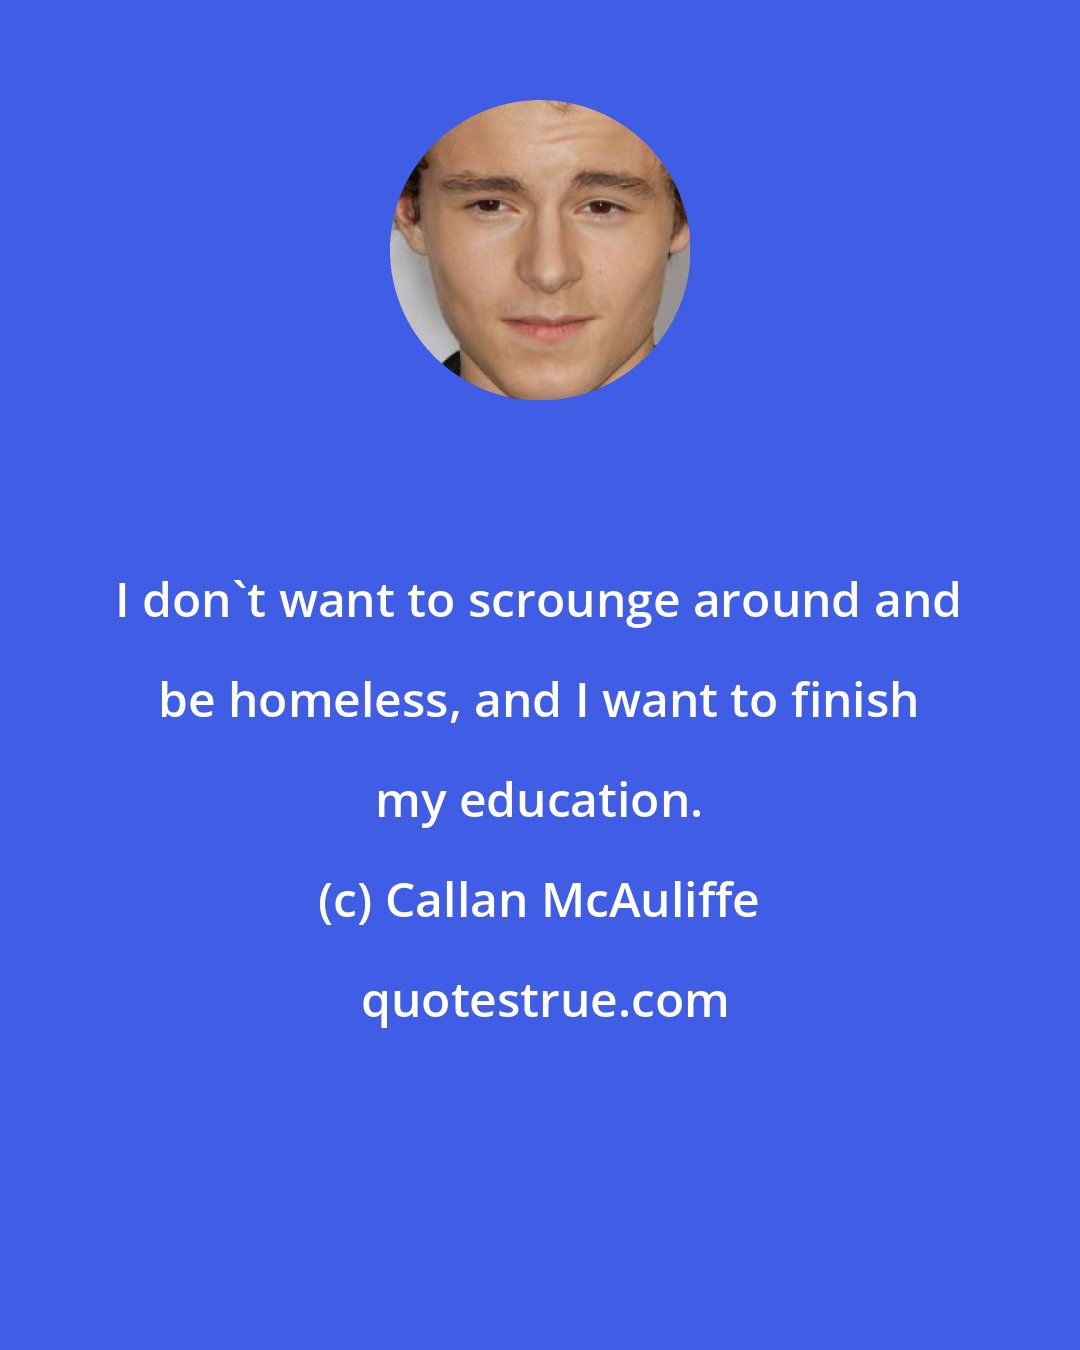 Callan McAuliffe: I don't want to scrounge around and be homeless, and I want to finish my education.